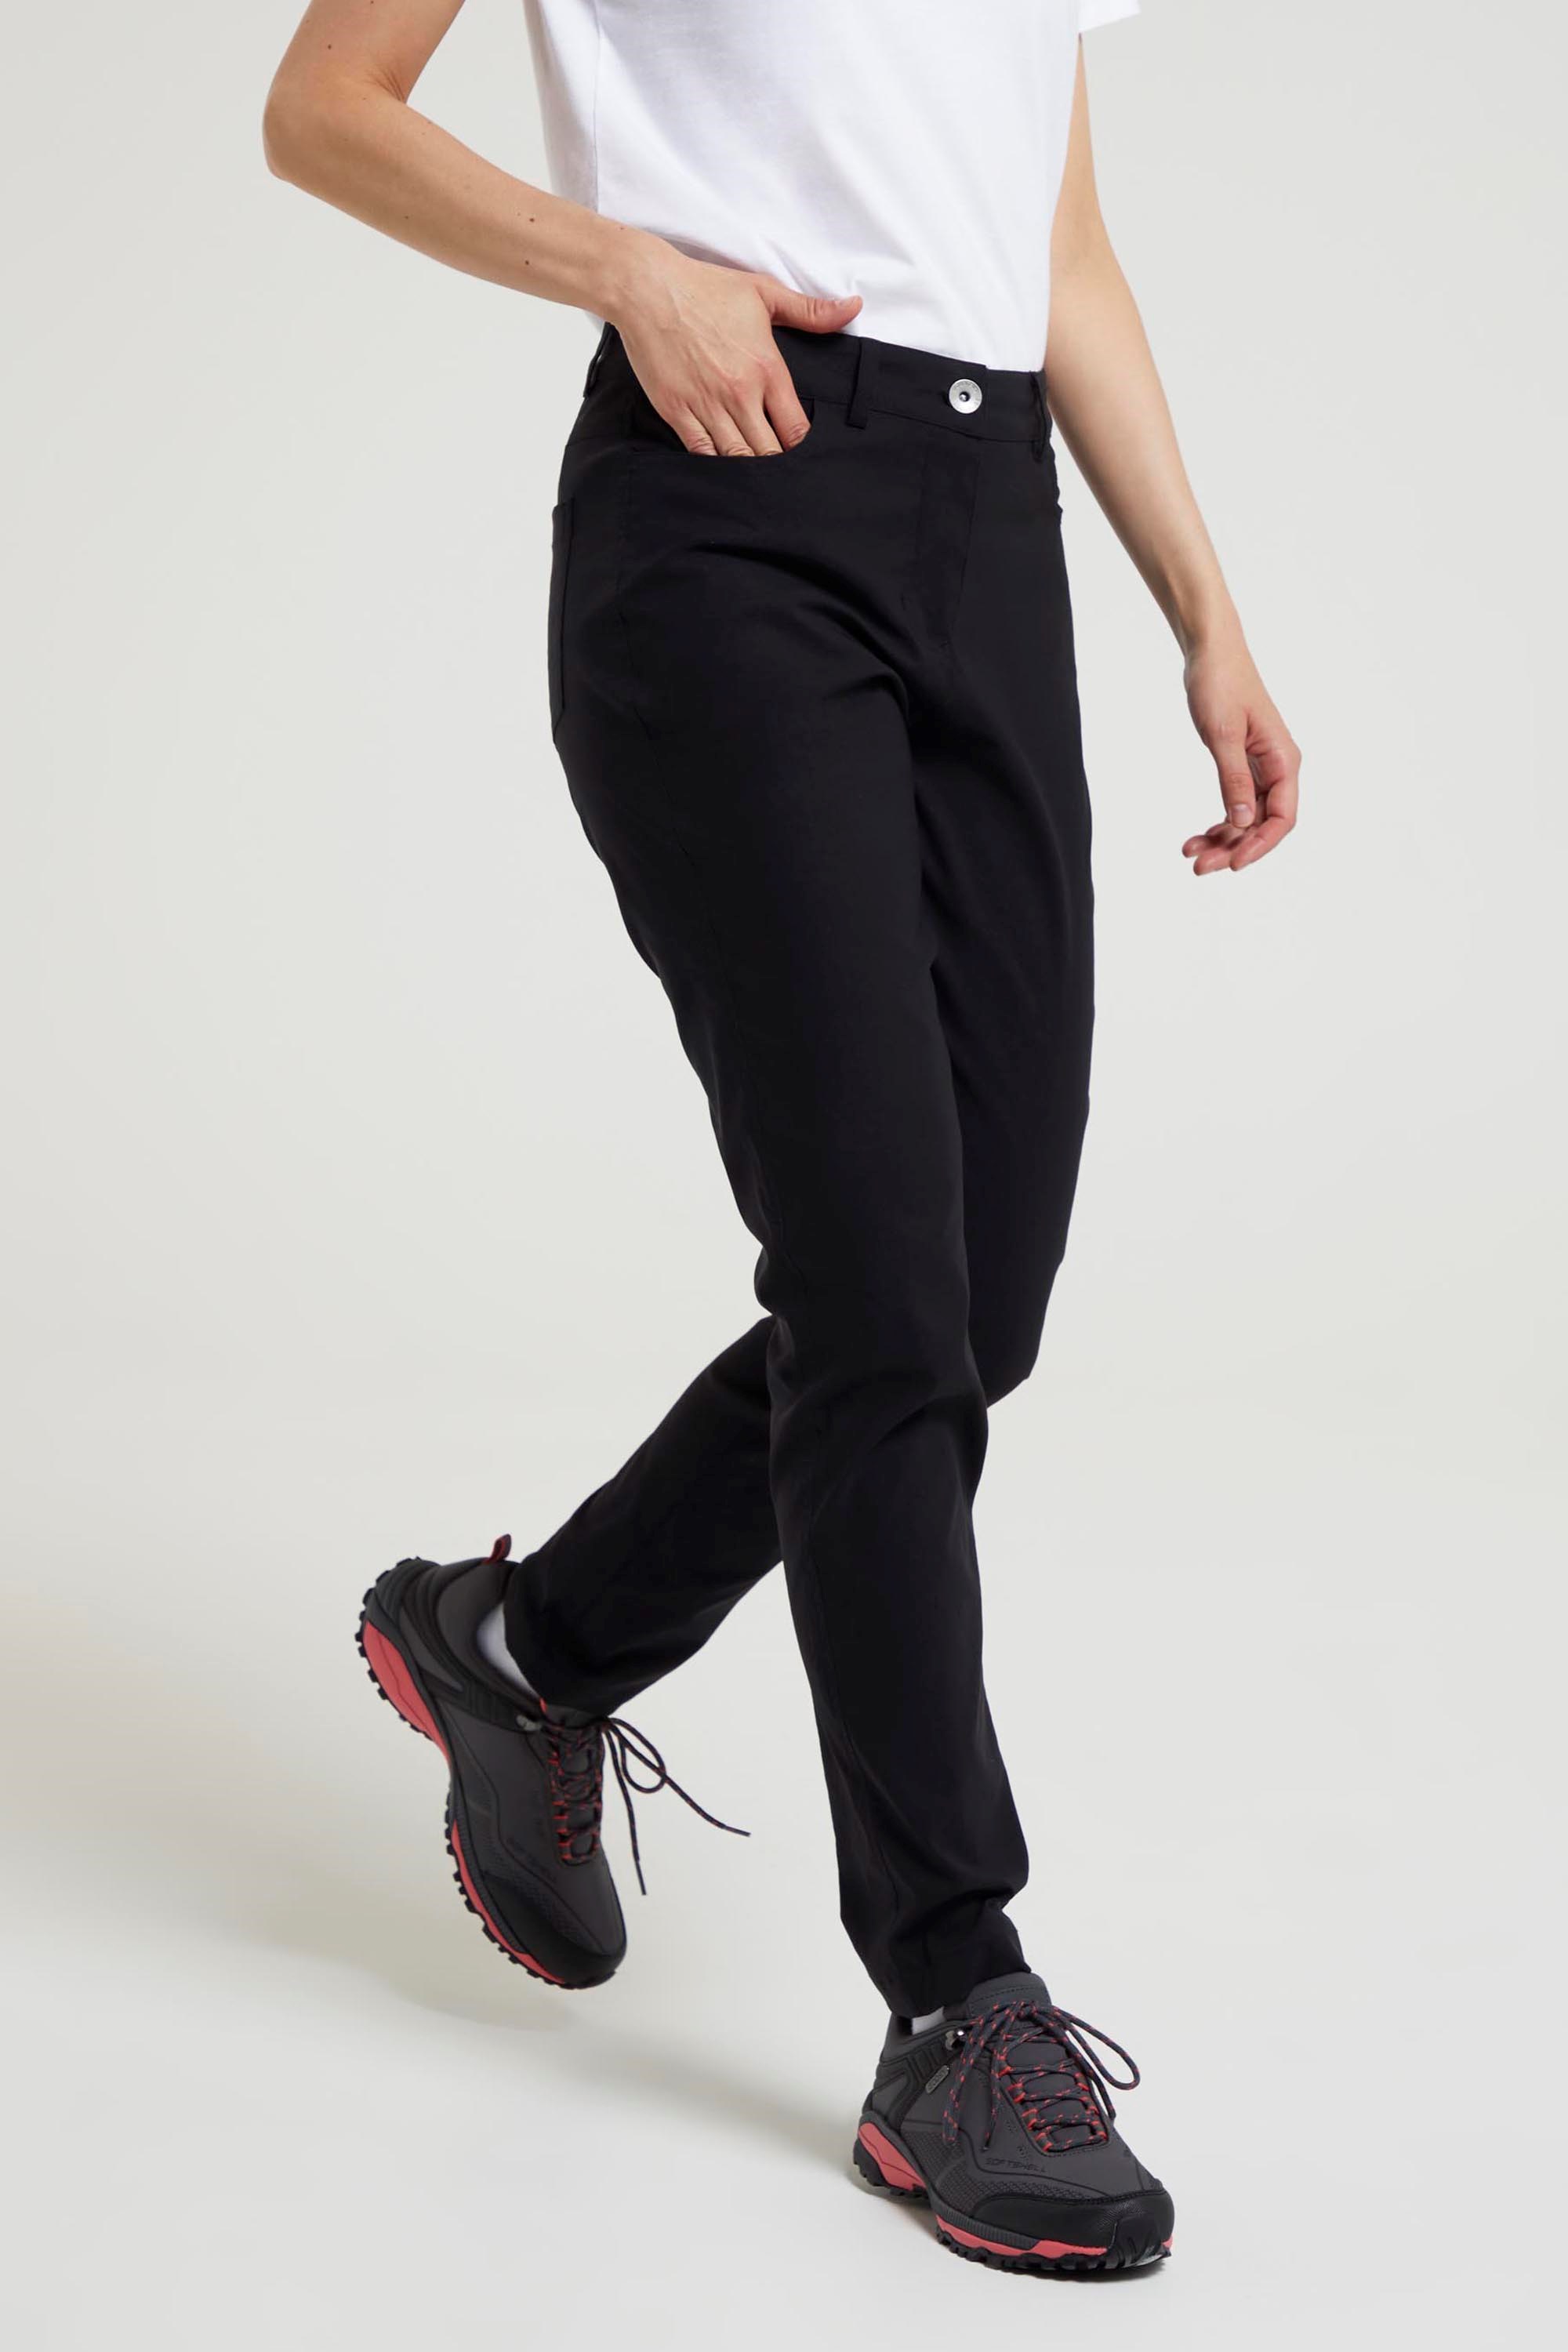 Stride Fitted Lightweight Womens Trousers - Black